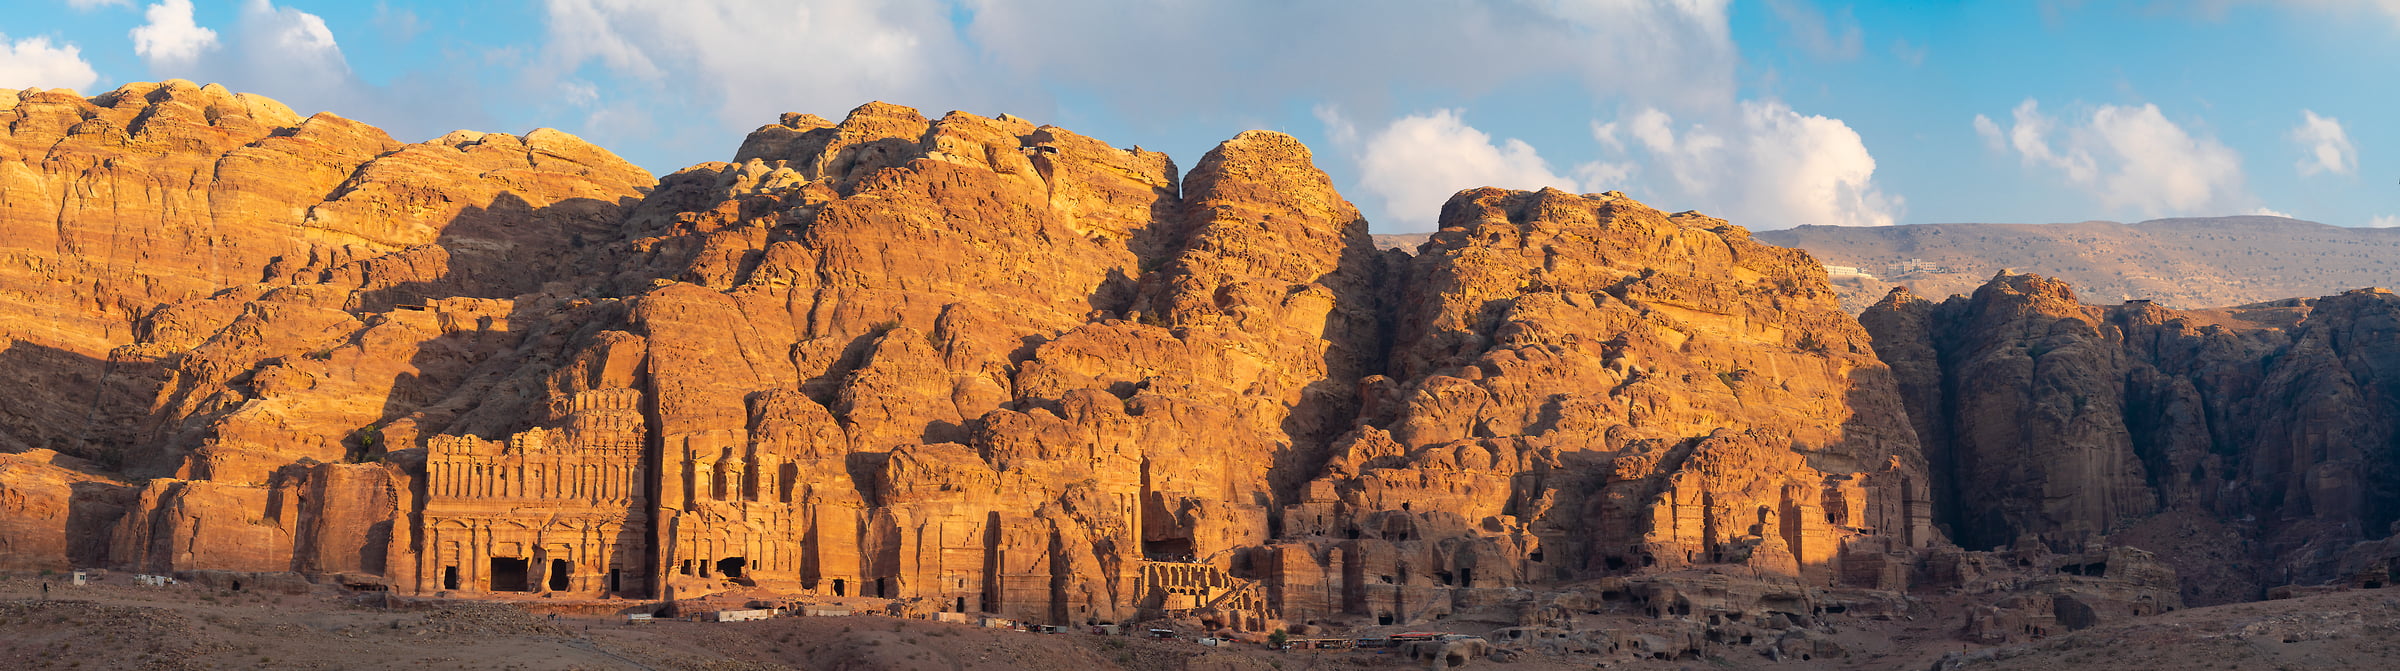 508 megapixels! A very high resolution, large-format VAST photo print of the tombs at Petra, Jordan; photograph created by Greg Probst in Petra, Jordan